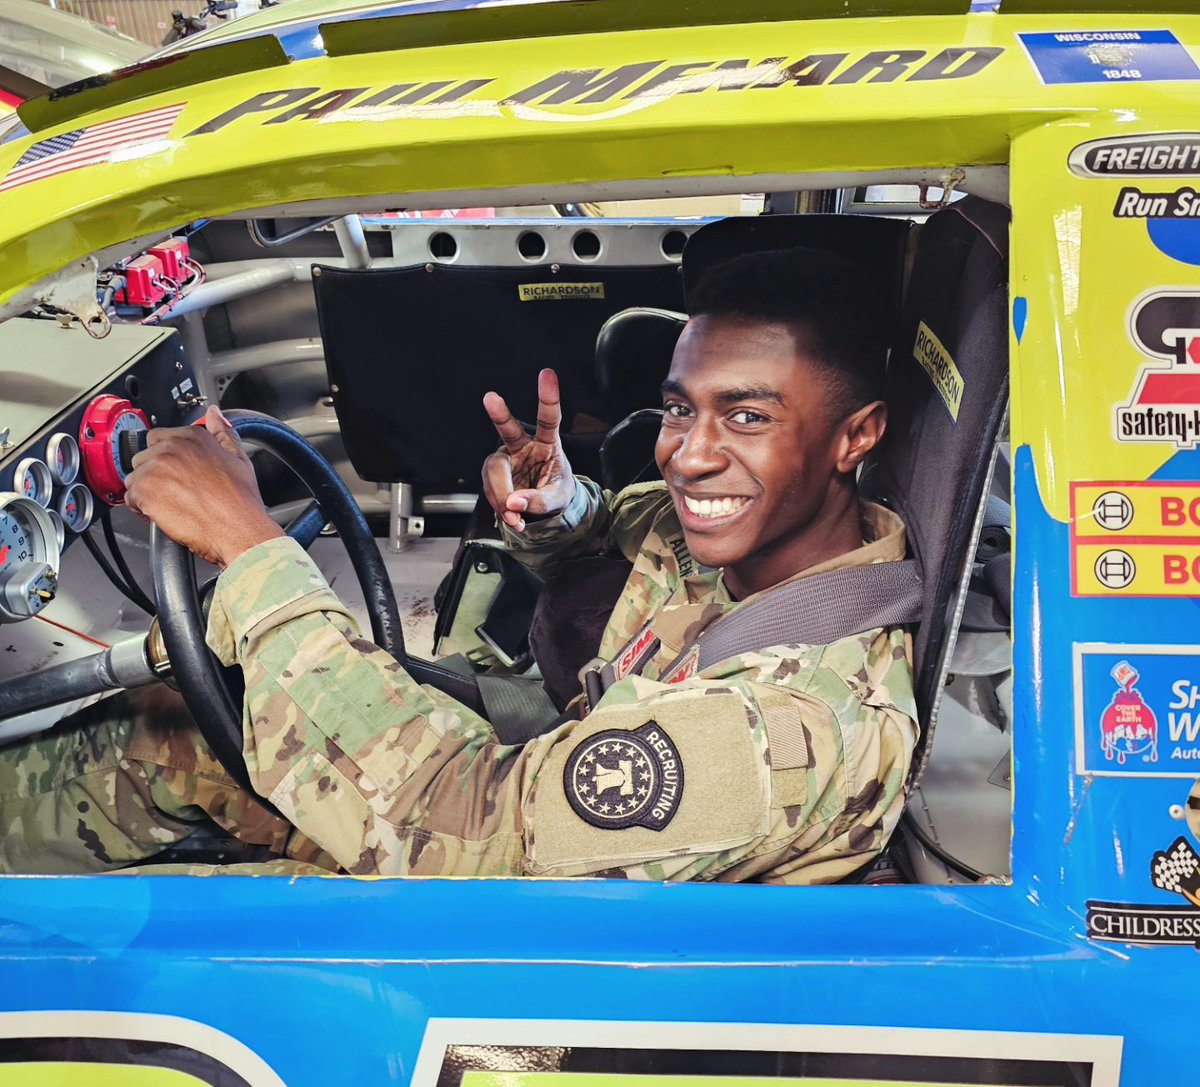 Join us at Texas Motor Speedway 🏁 from April 11th to the 14th for an exciting display featuring NASCAR racecars alongside the Fort Cavazos Army's impressive fleet of vehicles. And don't forget to participate for a chance to win an exclusive Driving Experience during the event!